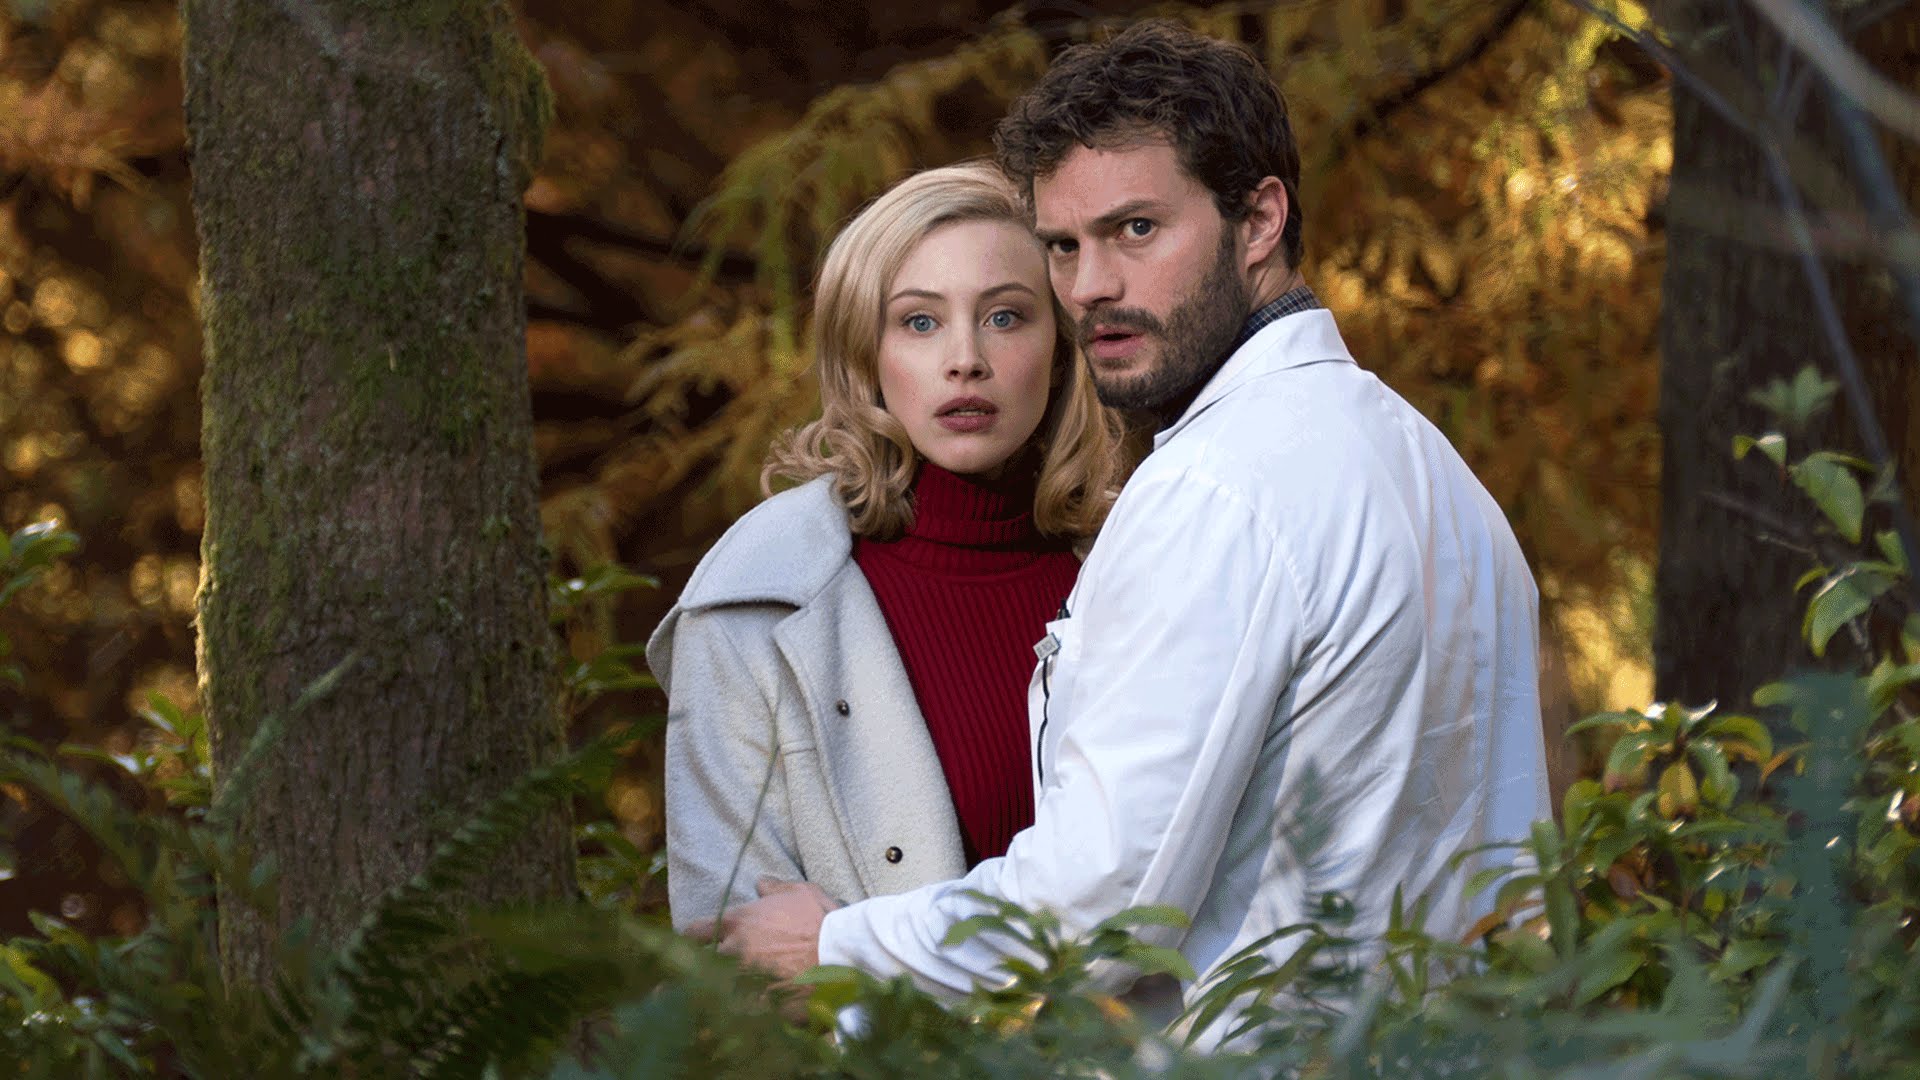 The 9th Life of Louis Drax – Official Trailer